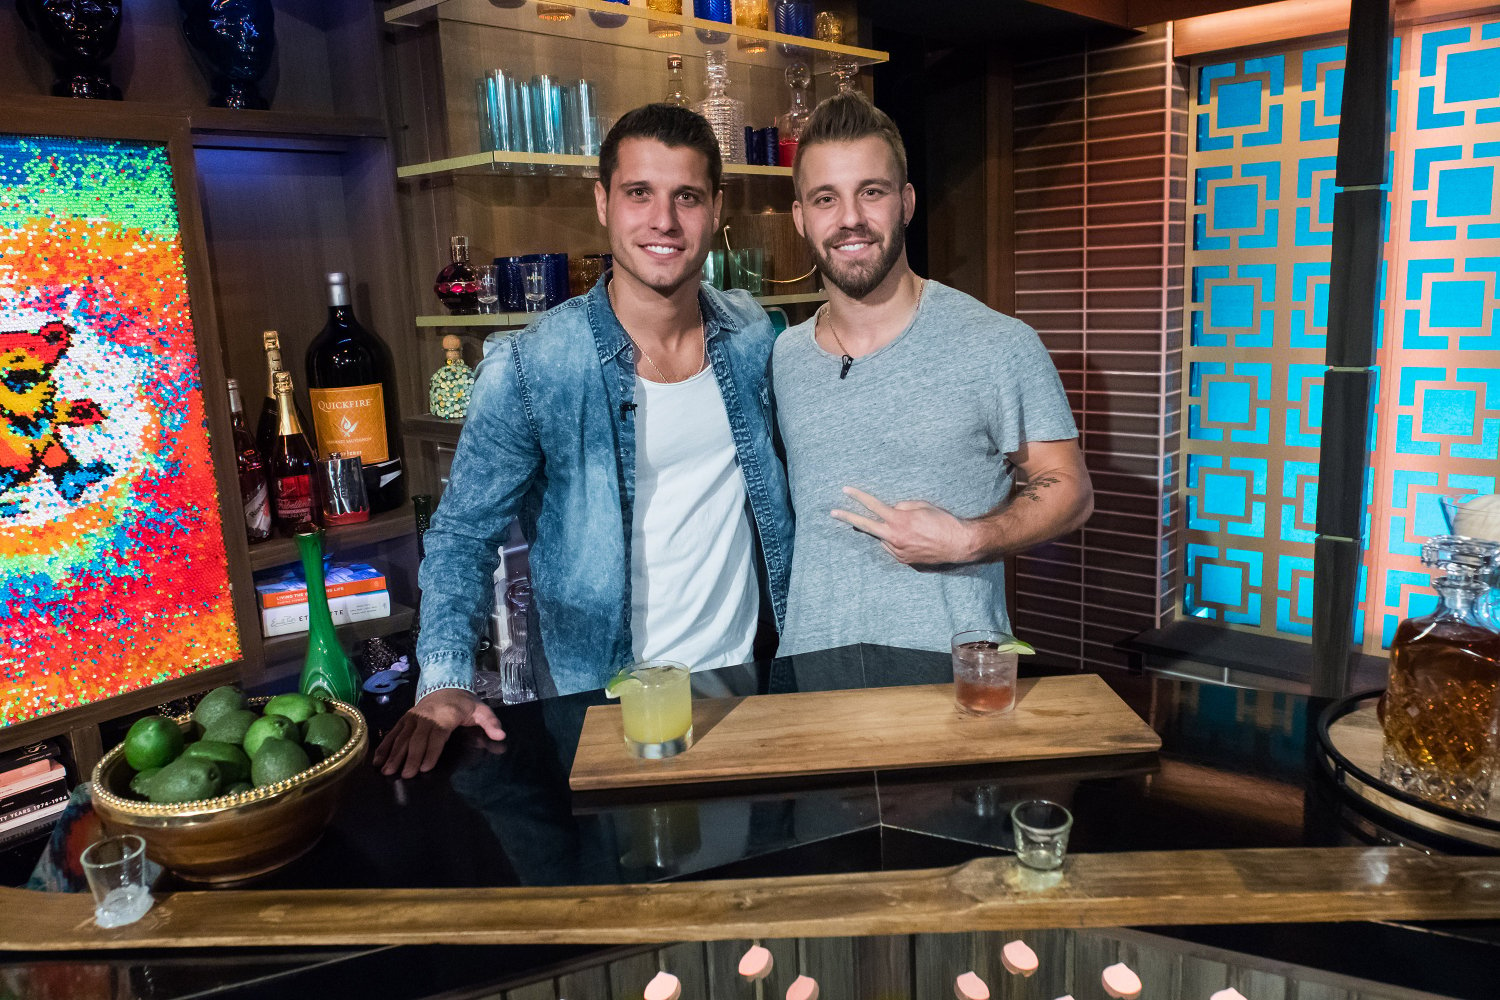 Cody Calafiore (from left) and Paulie Calafiore from 'Big Brother.'